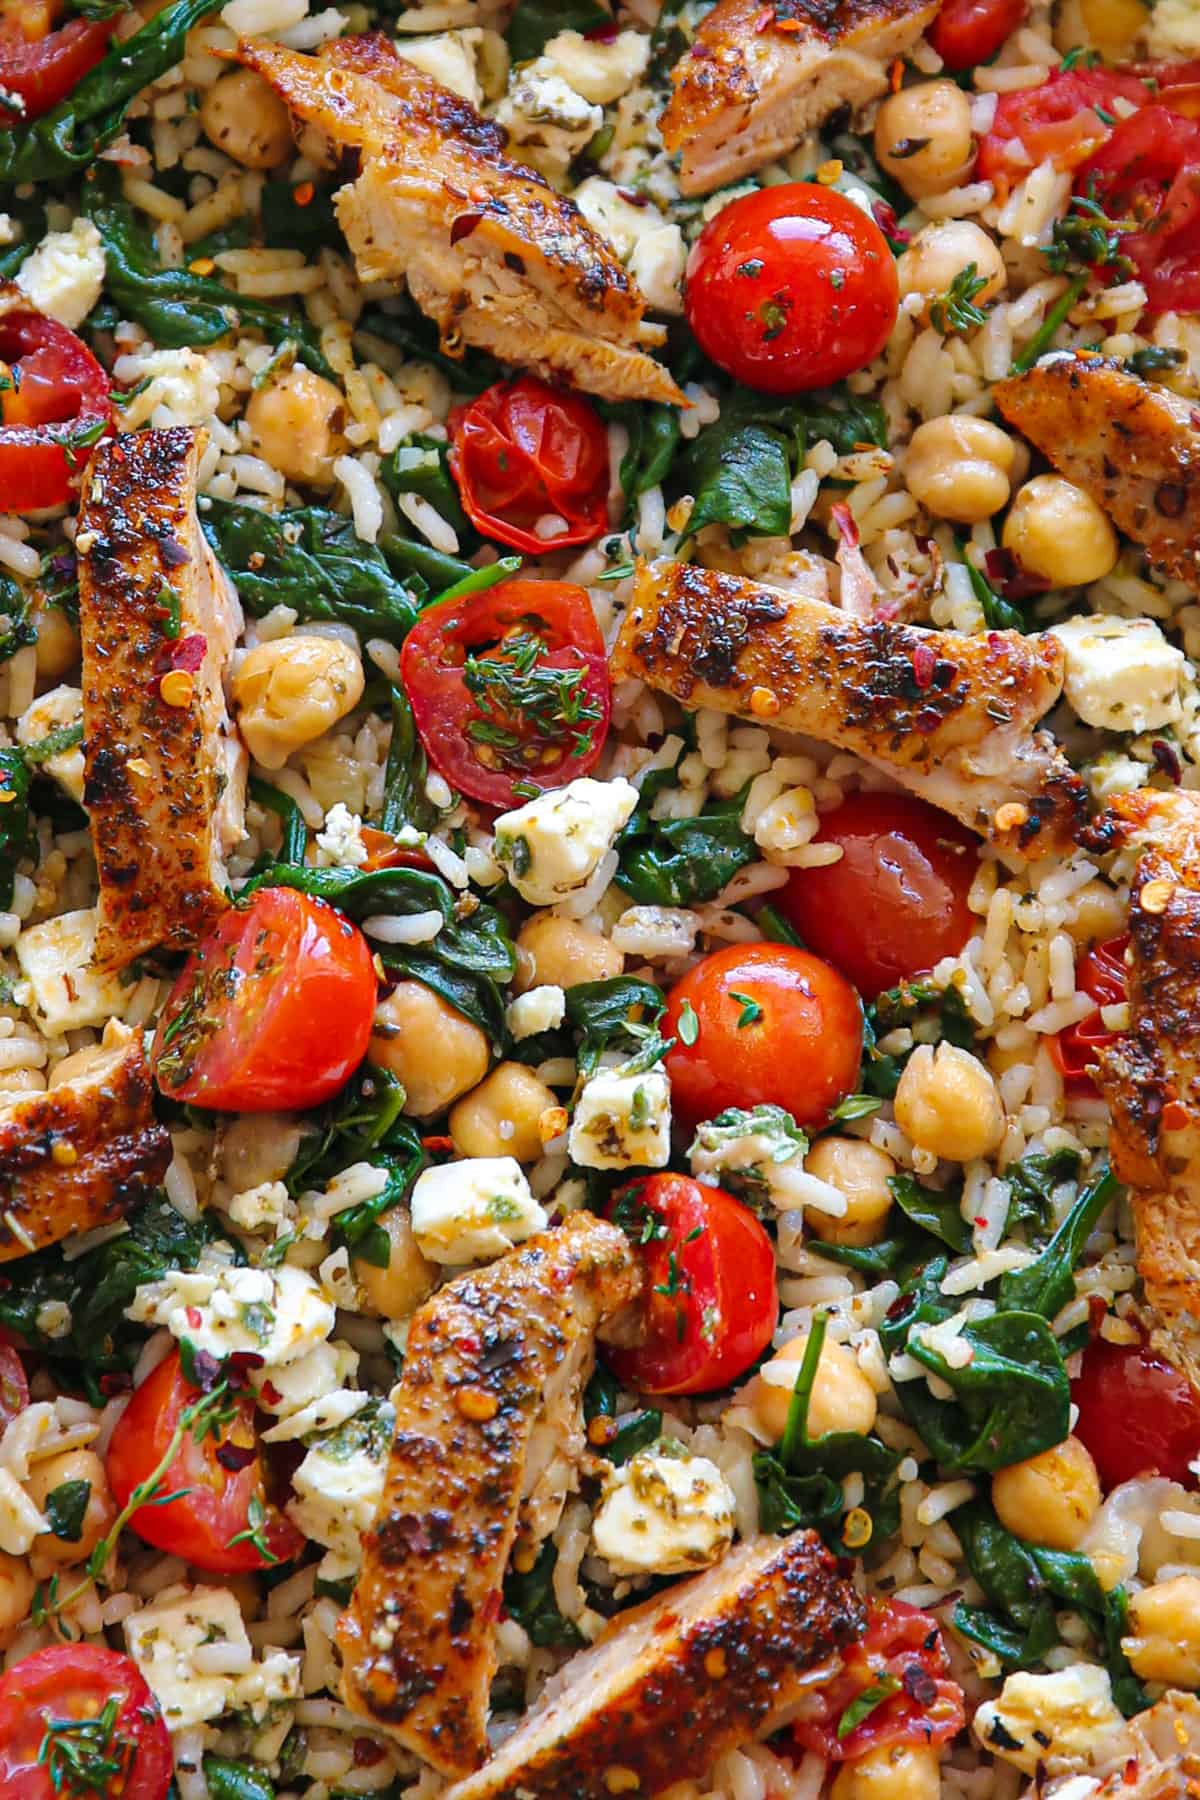 Greek Chicken and Lemon Rice with spinach, grape tomatoes, chickpeas, and feta cheese (close-up photo).